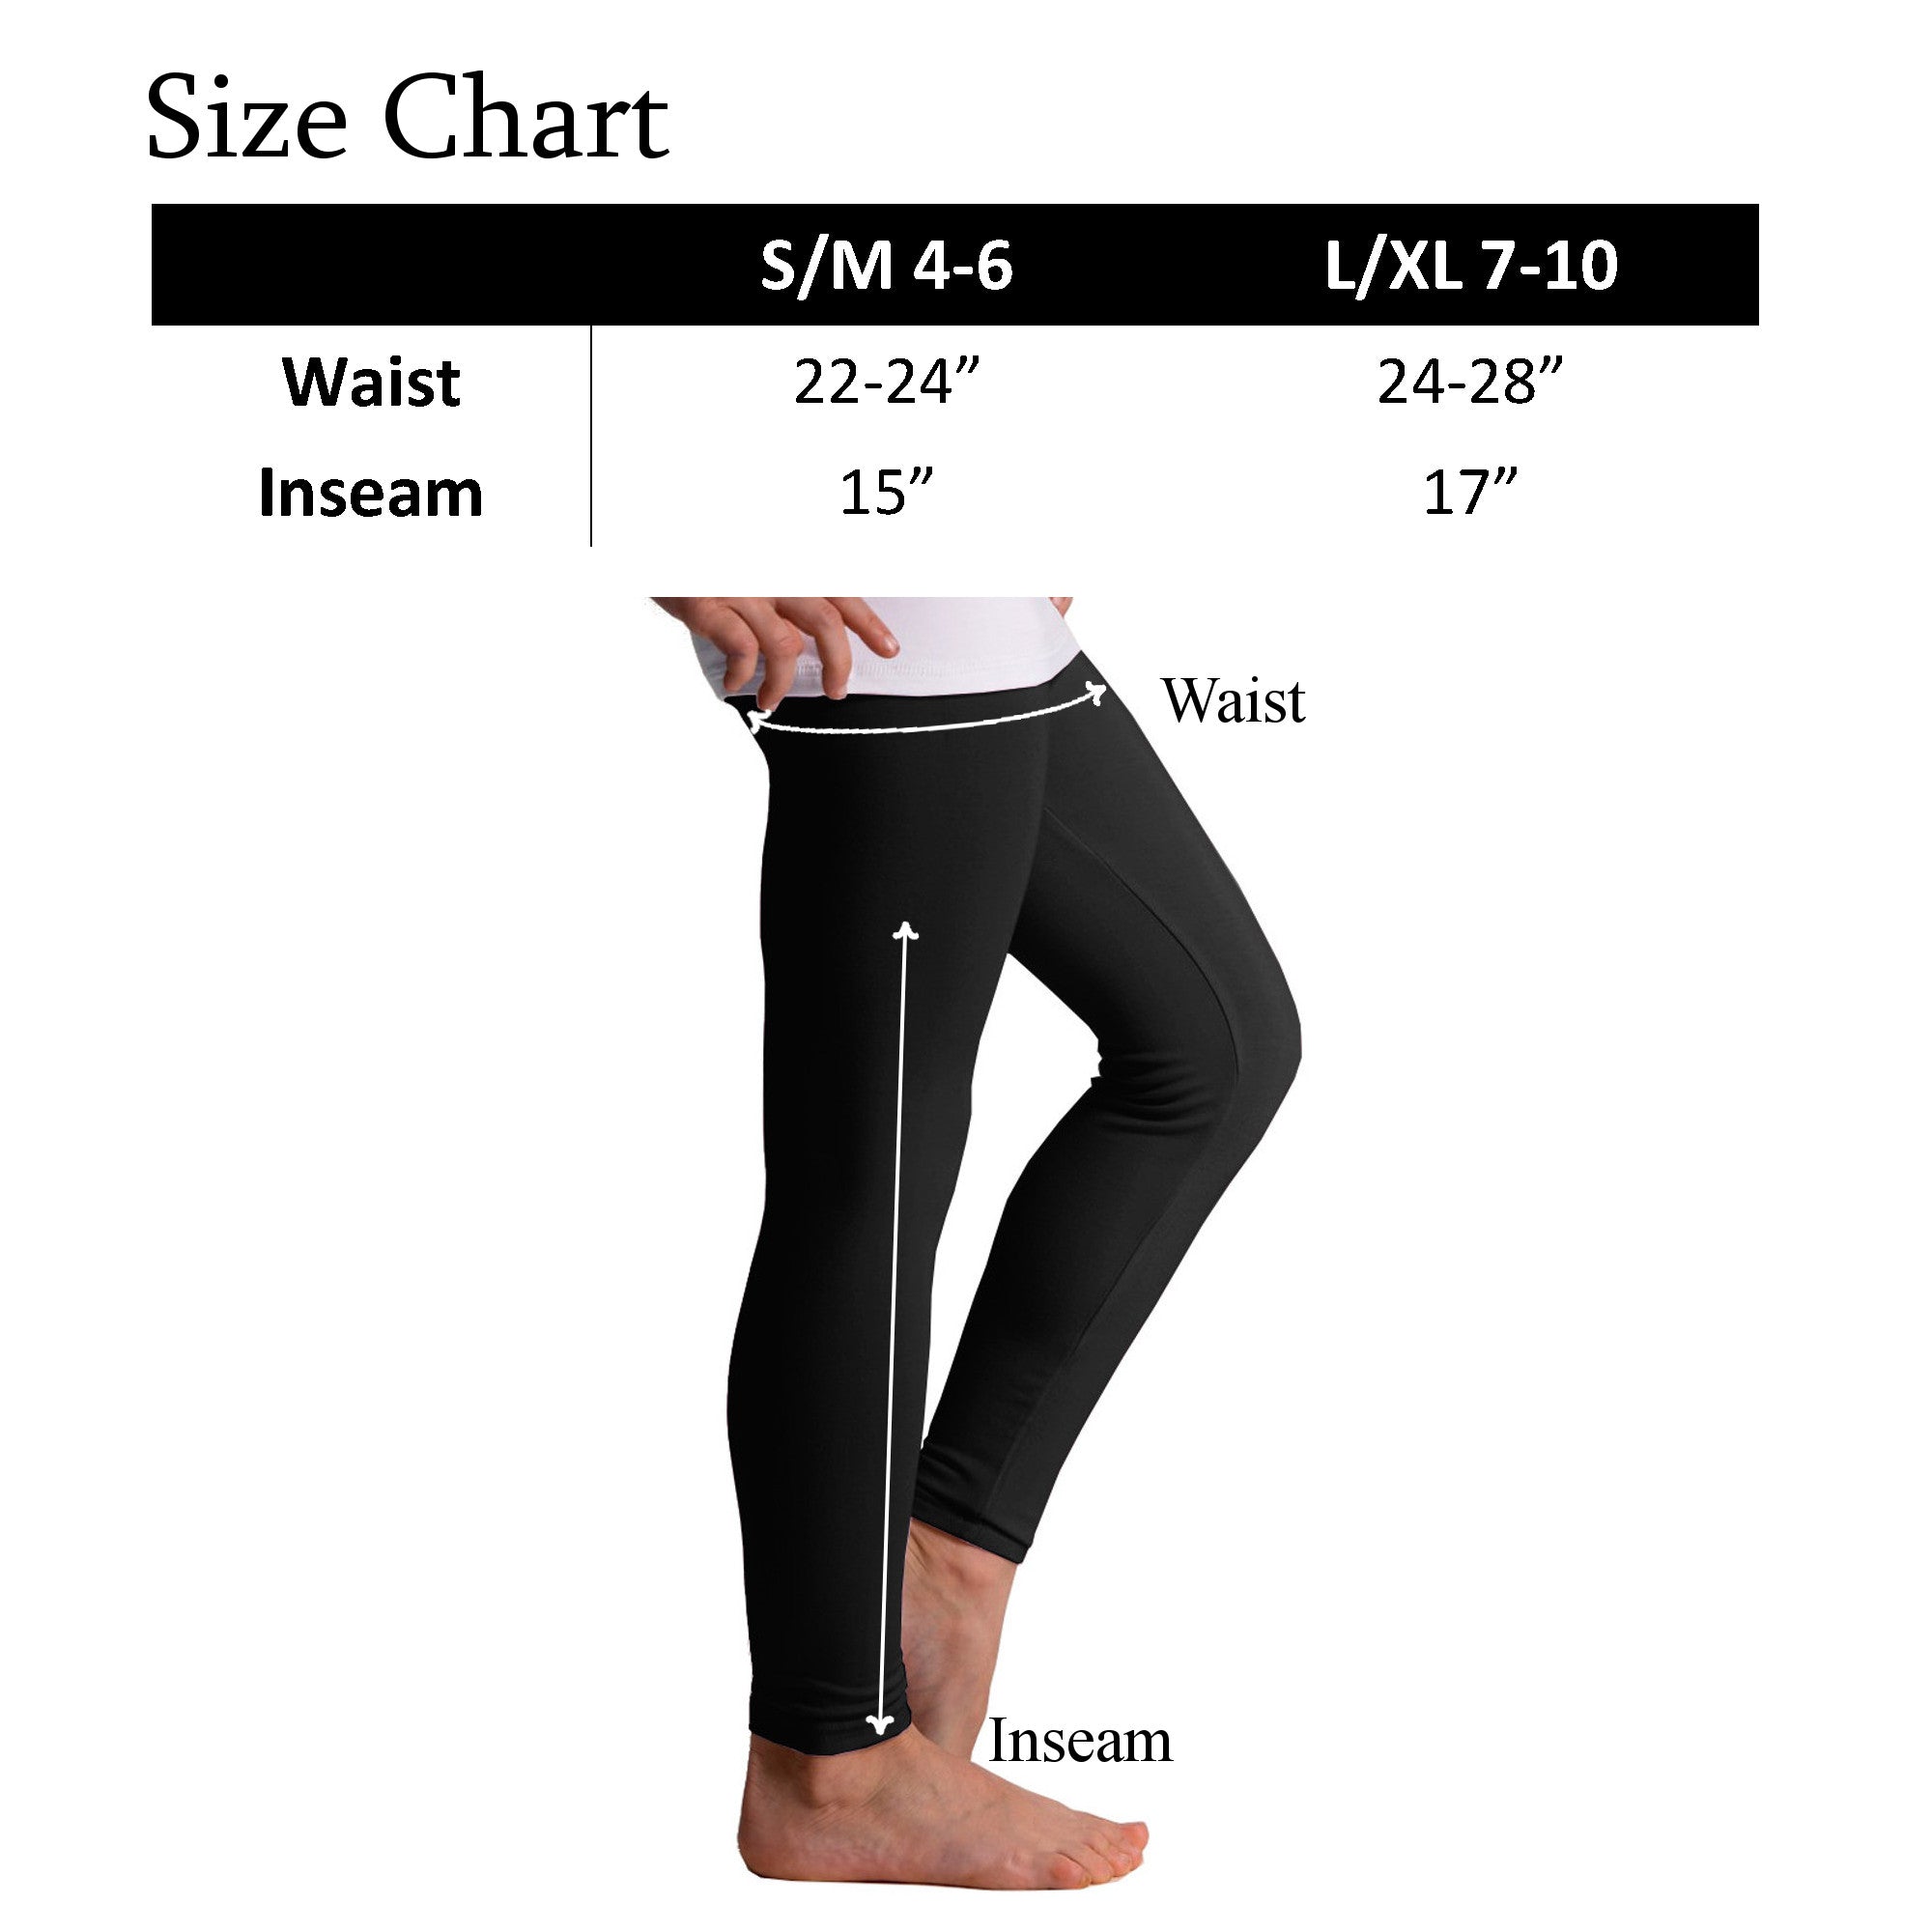 2 for $24 leggings from Fabletics (SOME HAVE POCKETS!) : r/referralcodes